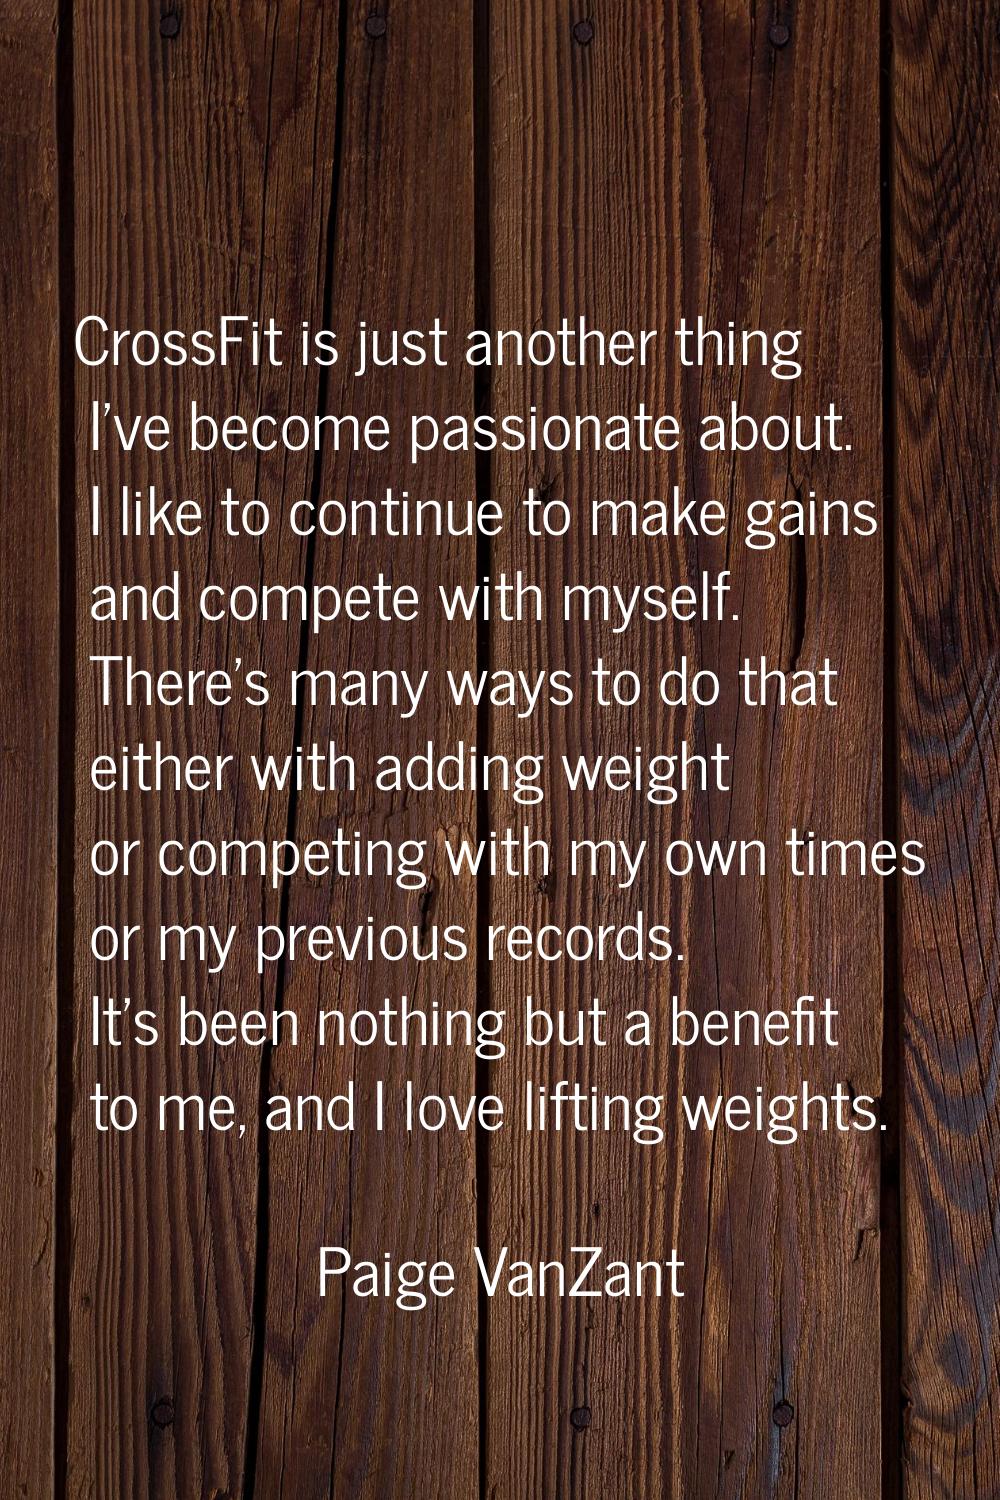 CrossFit is just another thing I've become passionate about. I like to continue to make gains and c